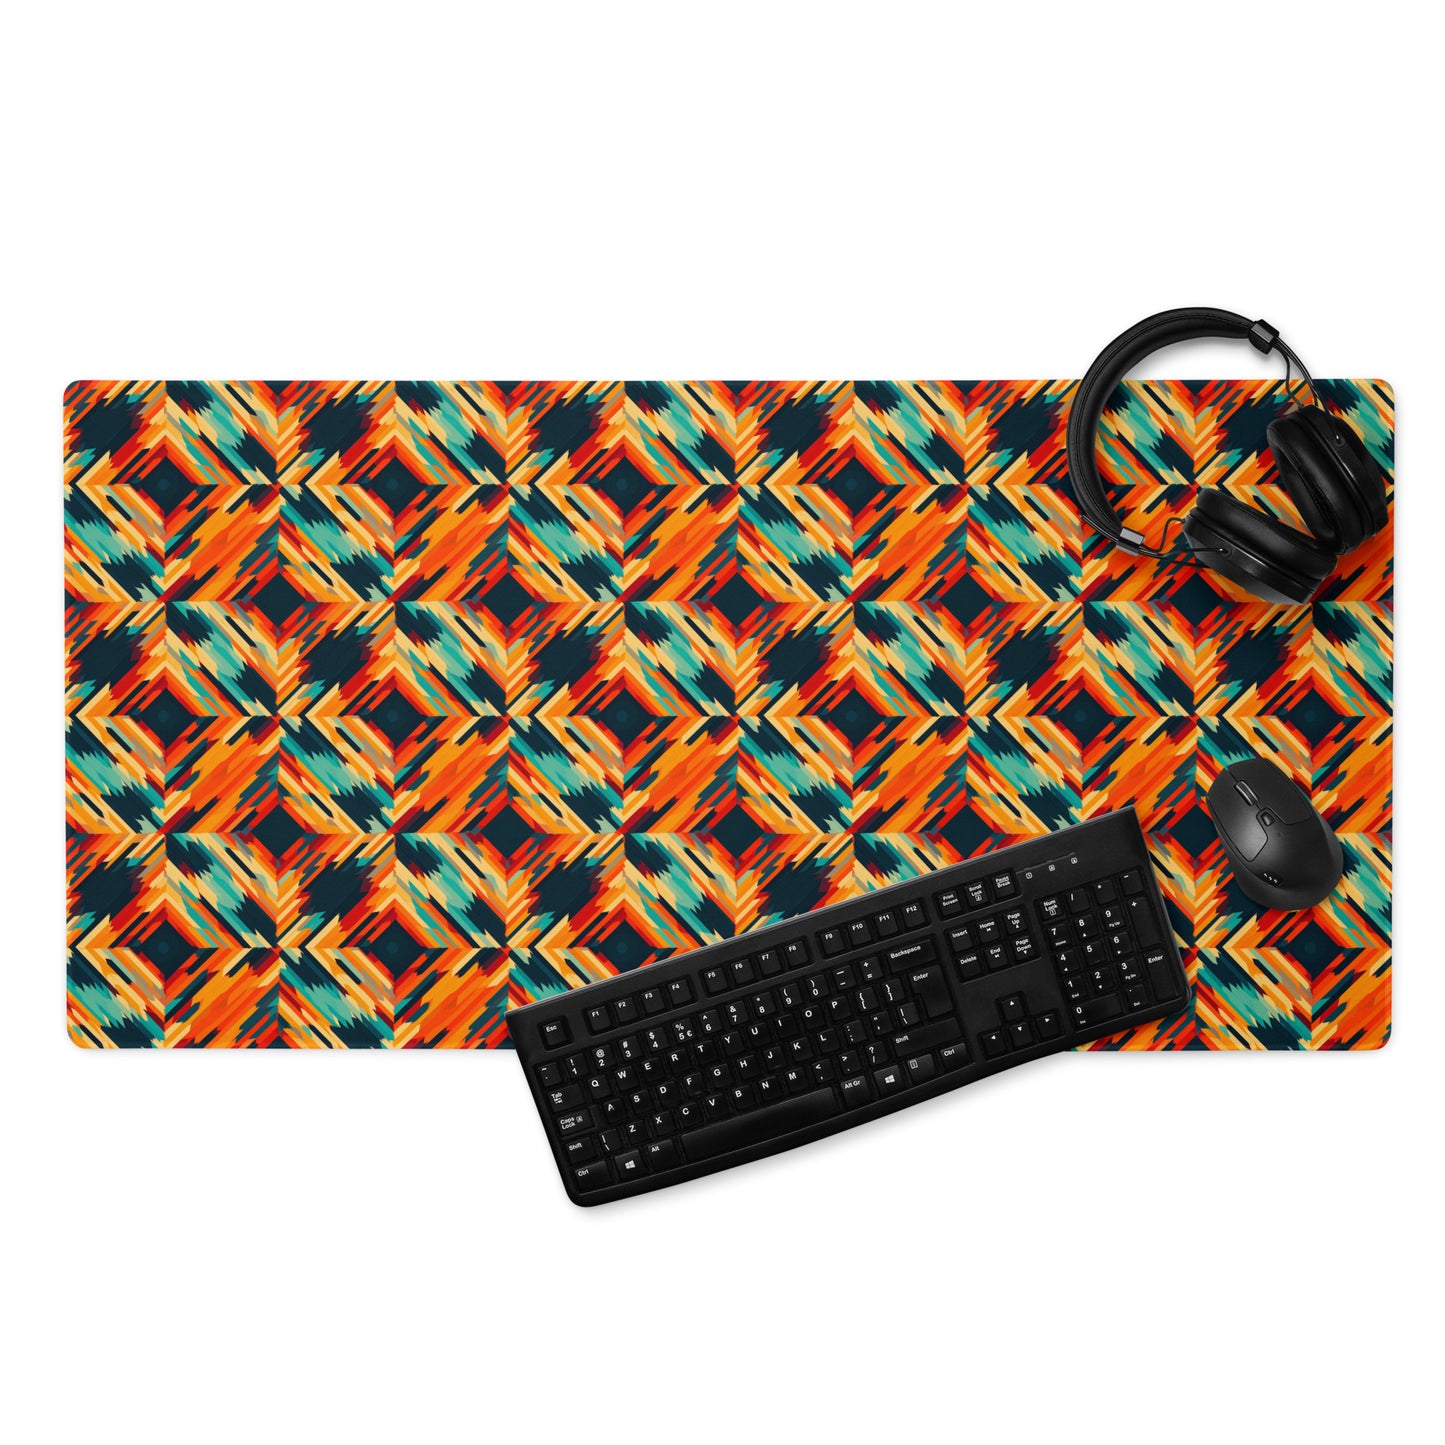 A 36" x 18" desk pad with a tiled abstract pattern on it displayed with a keyboard, headphones and a mouse. Orange in color.